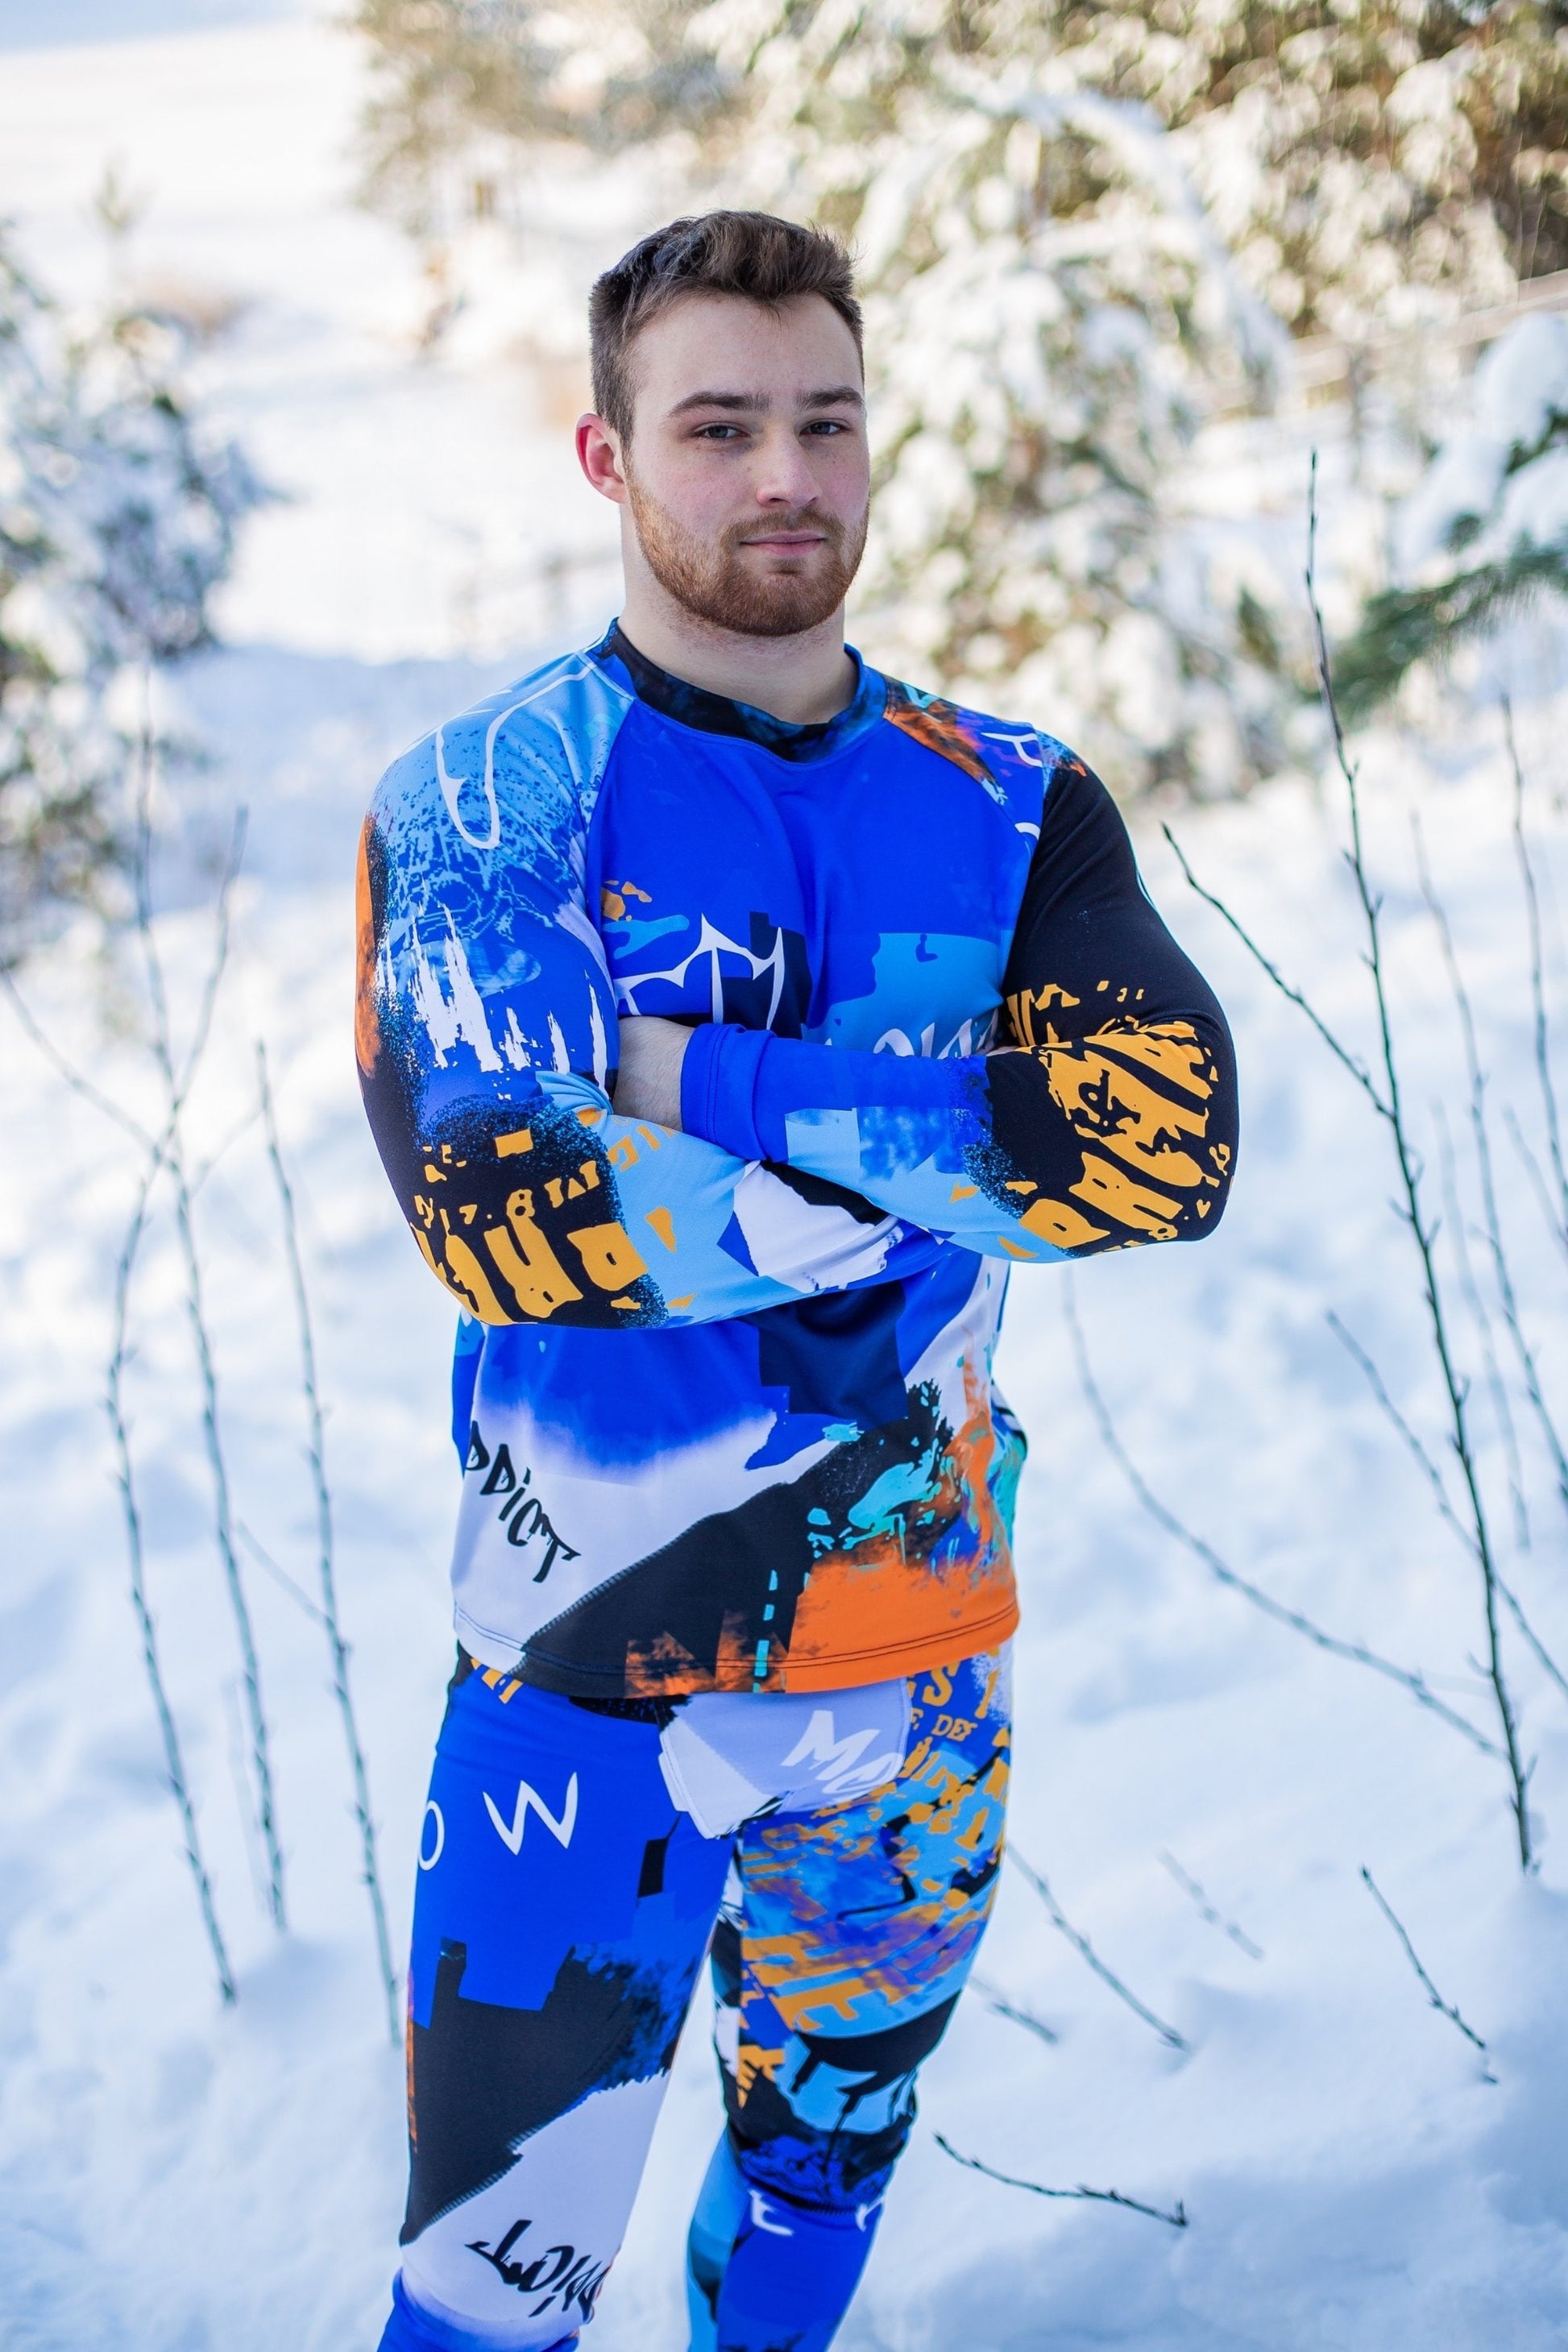 SET: Men's Blue Winter Thermal underwear, Montain's Clothes, Snowboard style, Man Leggings and Top, Men's Mountain's clothes, Man Leggings